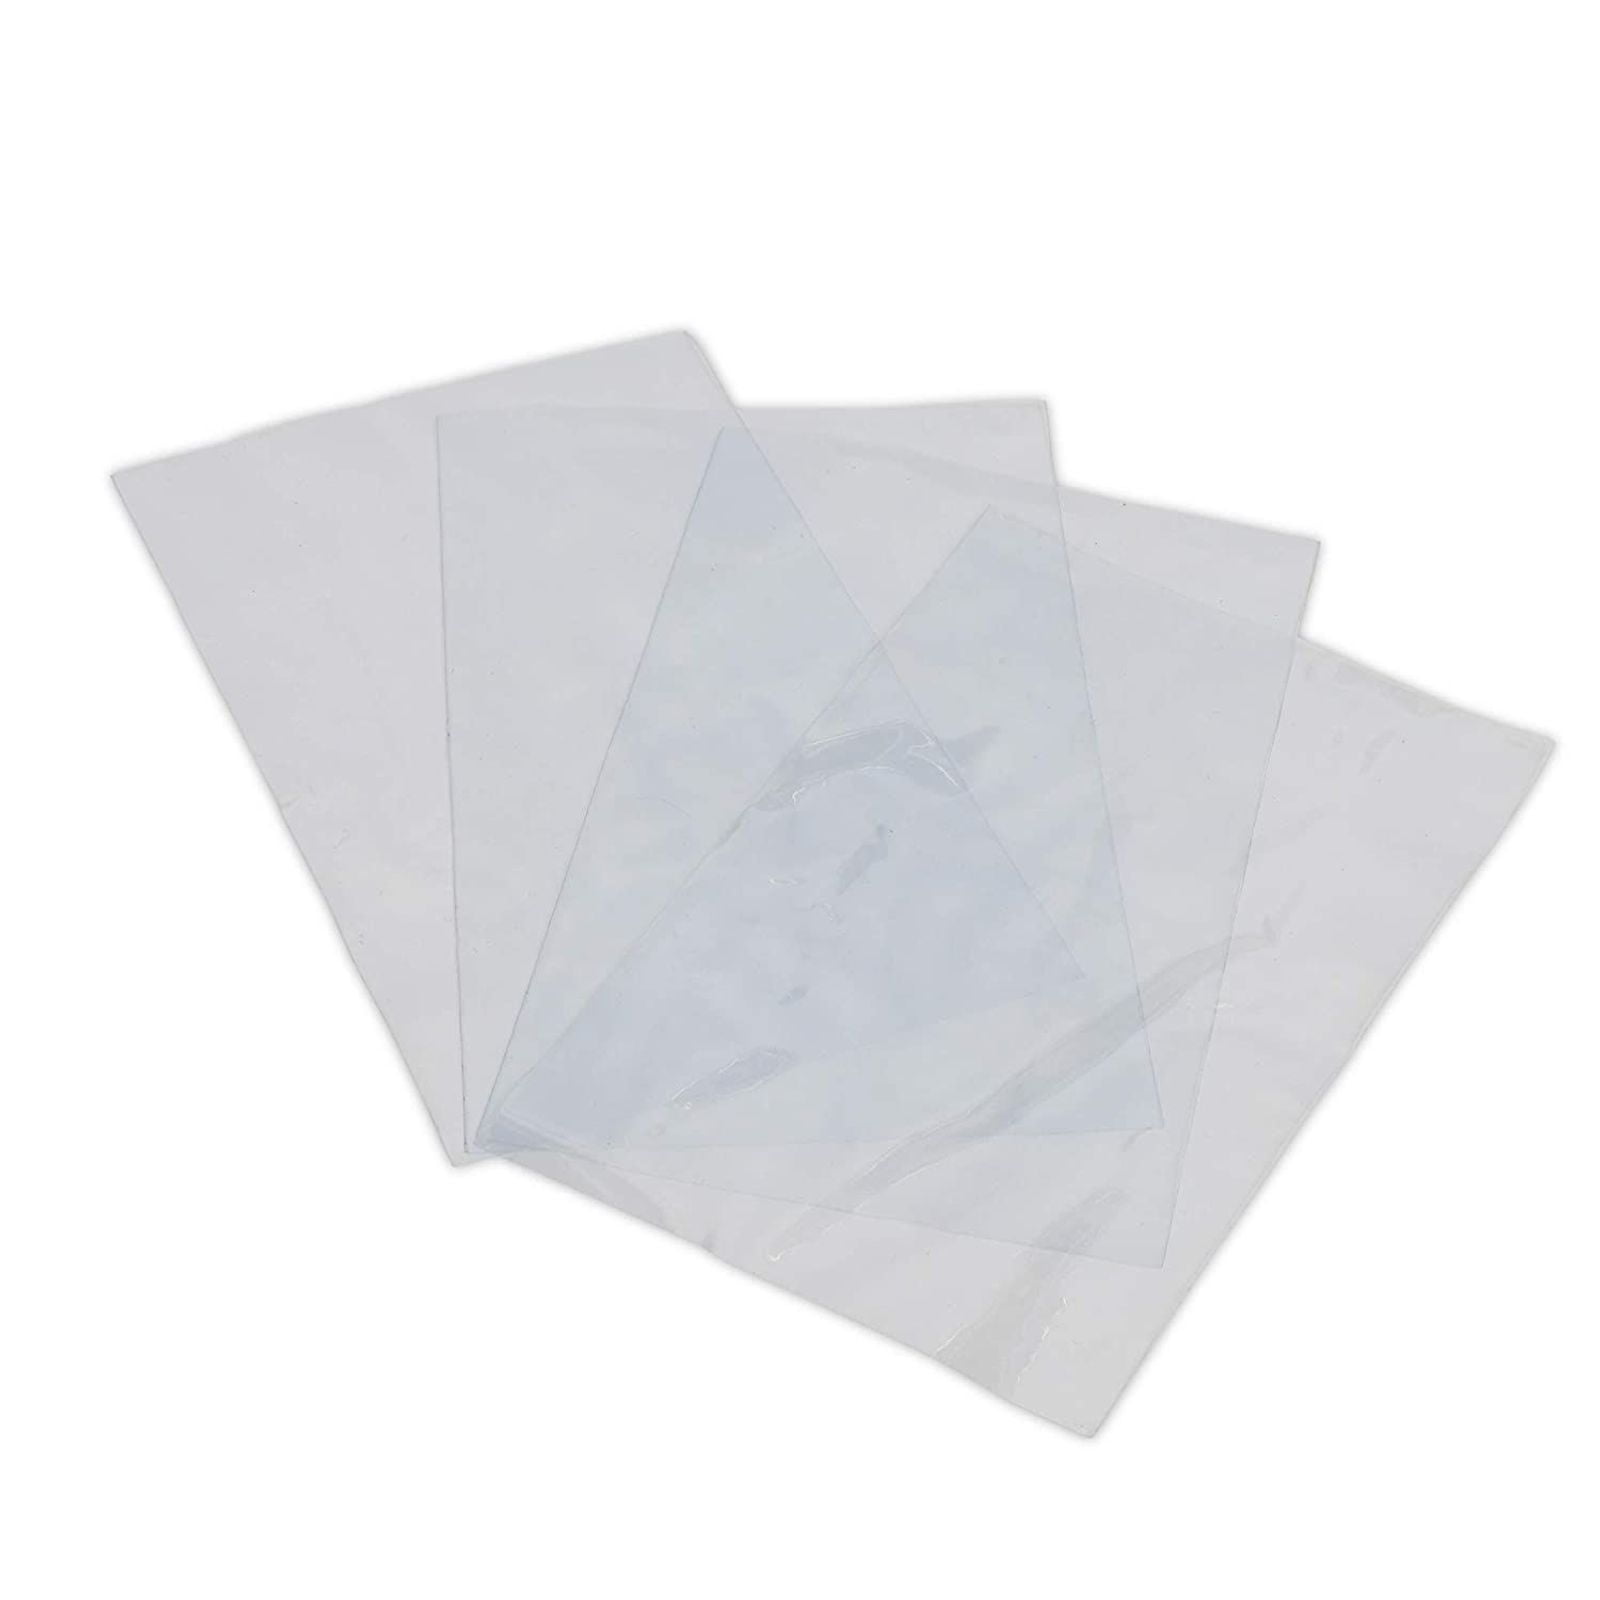 6.25x10.75 inch Odorless PVC Heat Shrink Wrap Bags 100 Guage 100 Pack Clear 